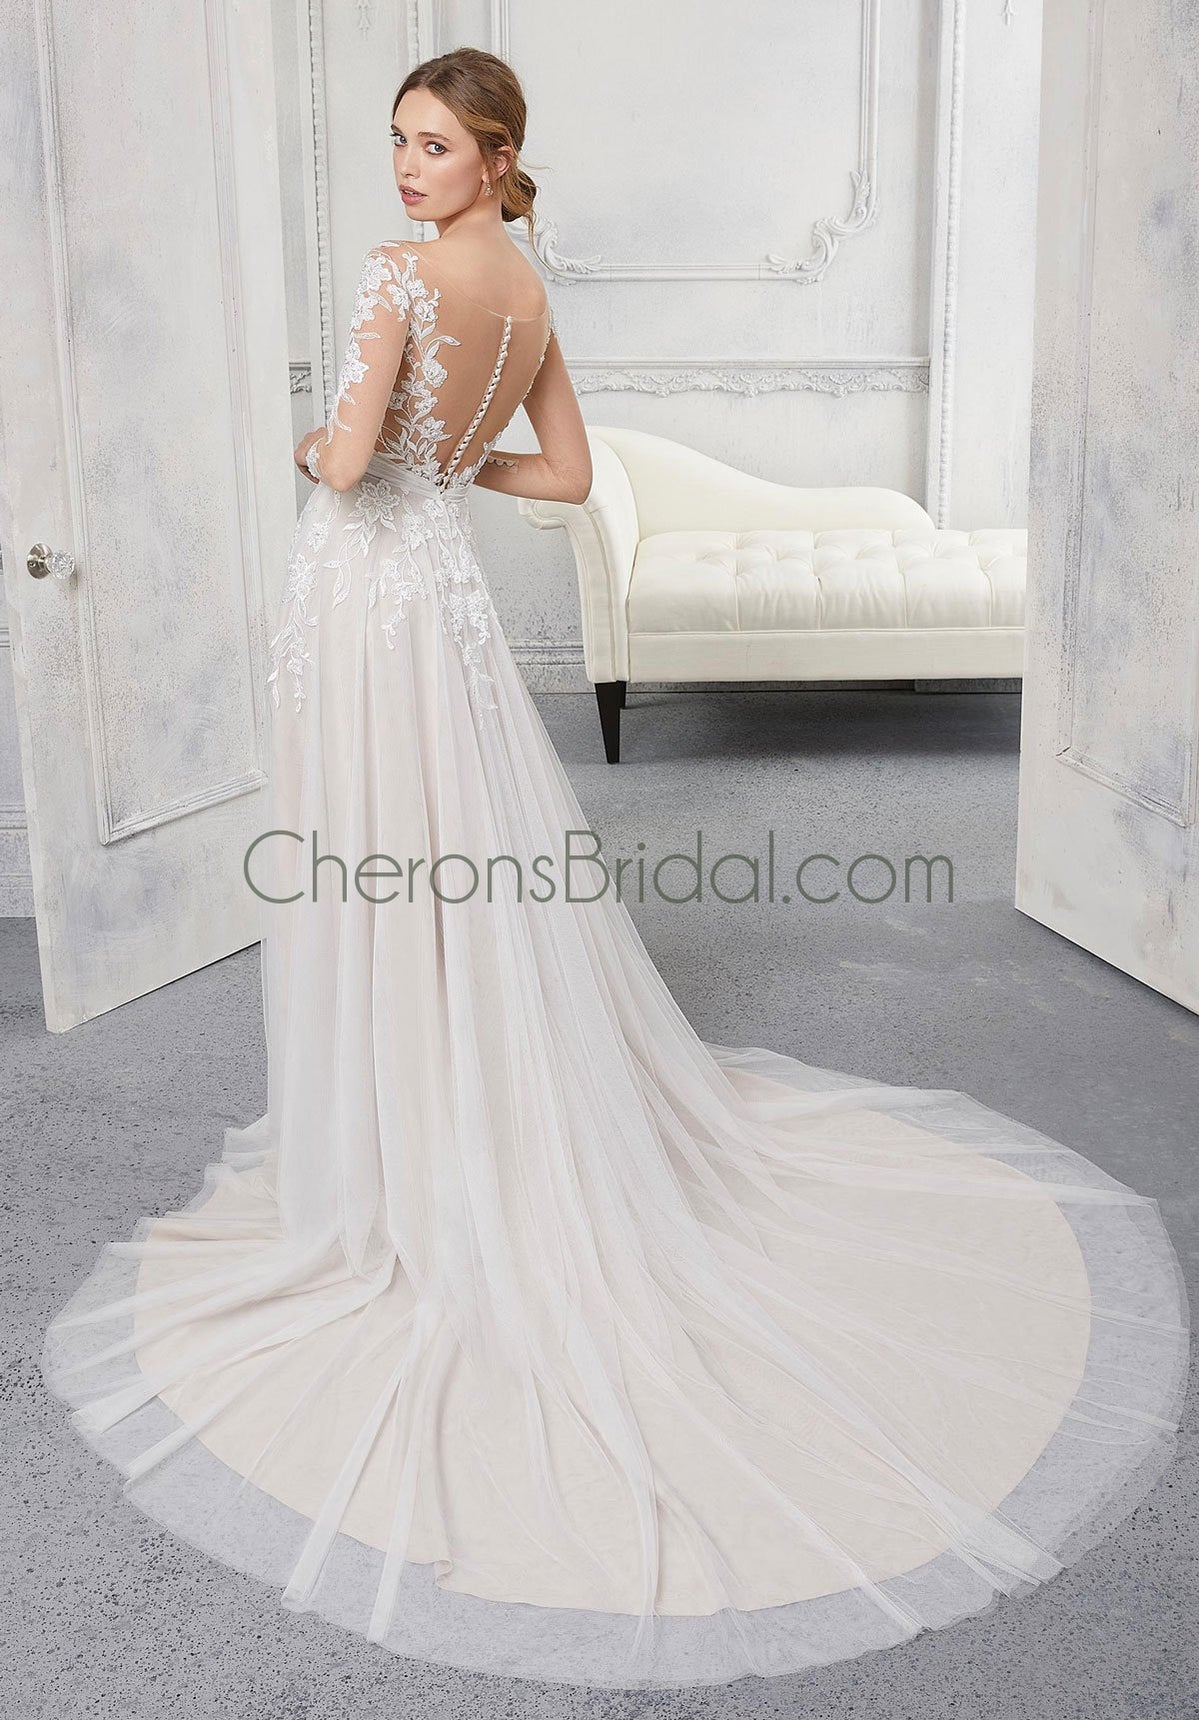 Blu - 5912 - Colleen - Cheron's Bridal, Wedding Gown - Morilee Blu - - Wedding Gowns Dresses Chattanooga Hixson Shops Boutiques Tennessee TN Georgia GA MSRP Lowest Prices Sale Discount